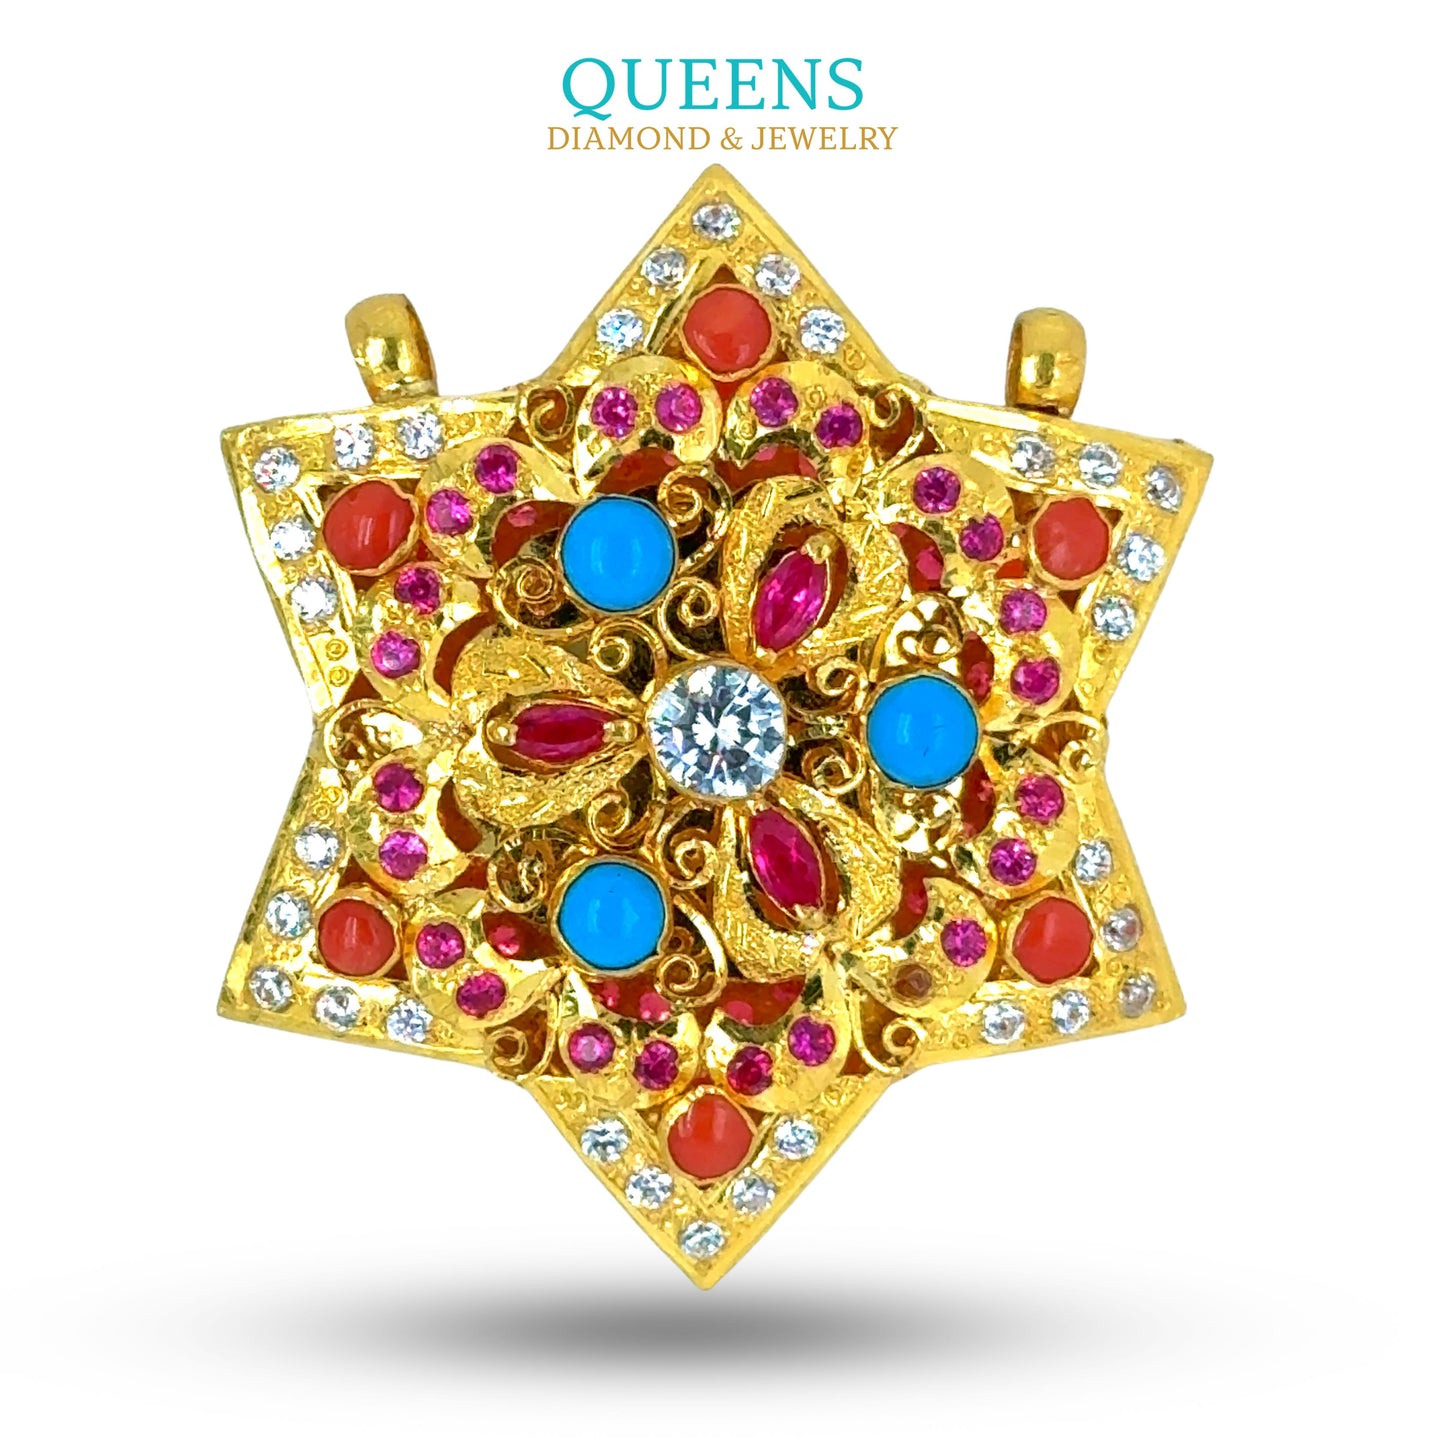 24KT Gold, Handmade Small Ghau with Coral, Turquoise & CZ Stones